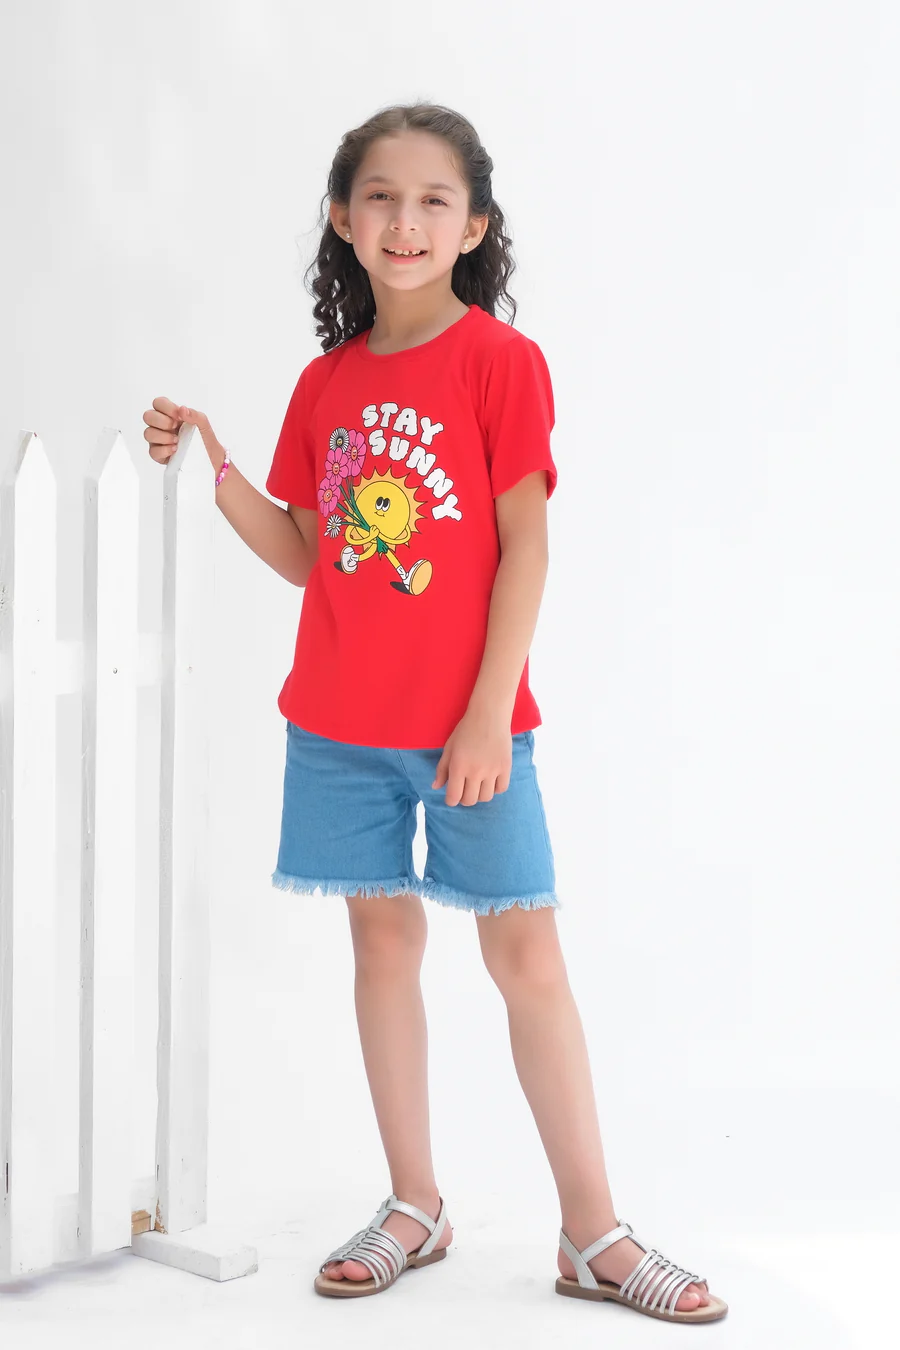 Stay Sunny - Half Sleeves T-Shirts For Kids - Red - SBT-349